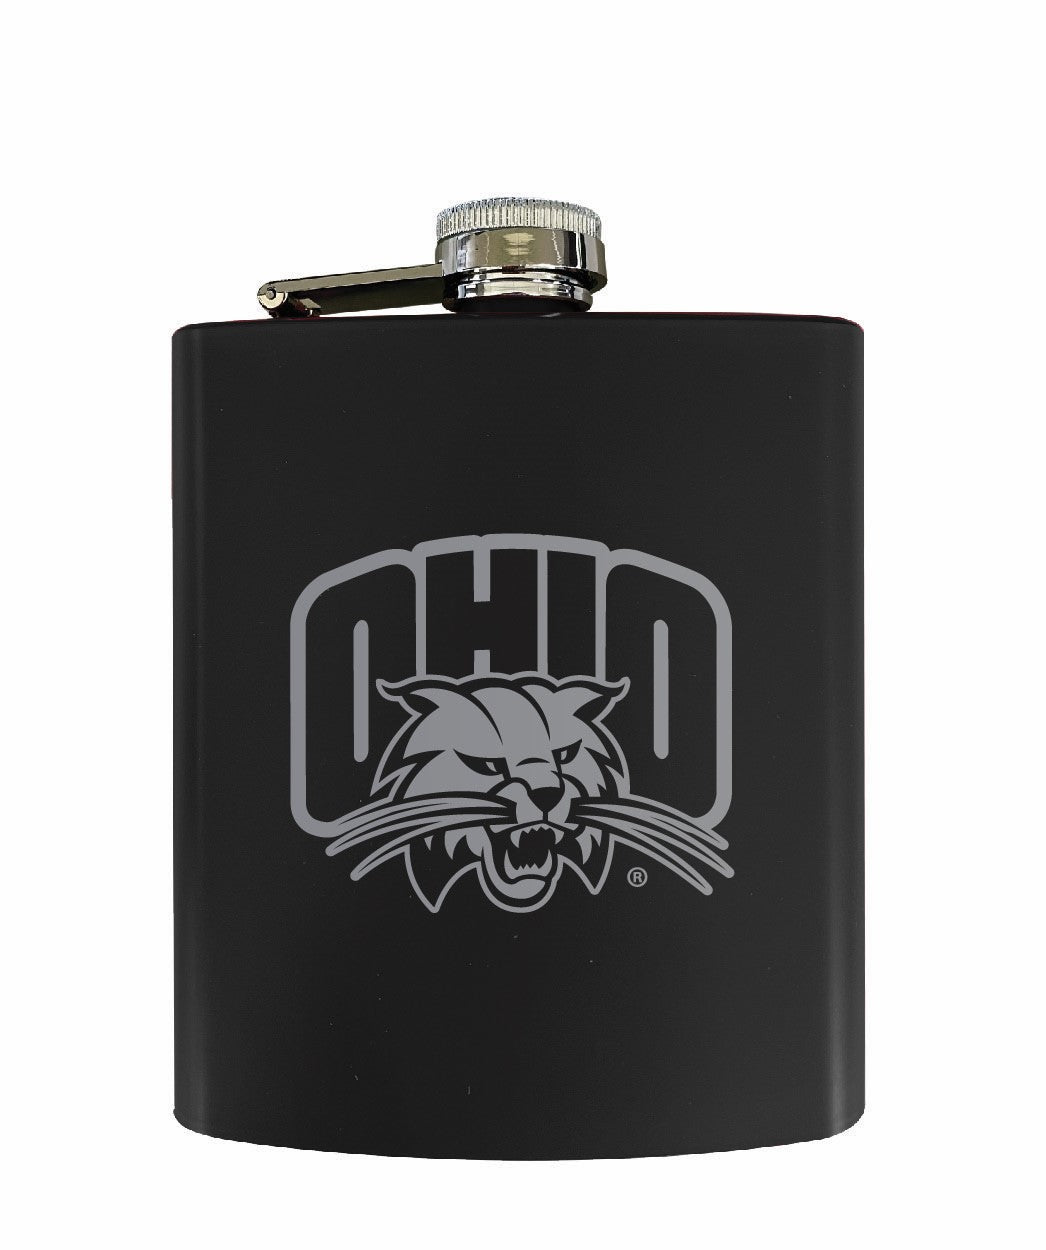 Ohio University Stainless Steel Etched Flask - Choose Your Color